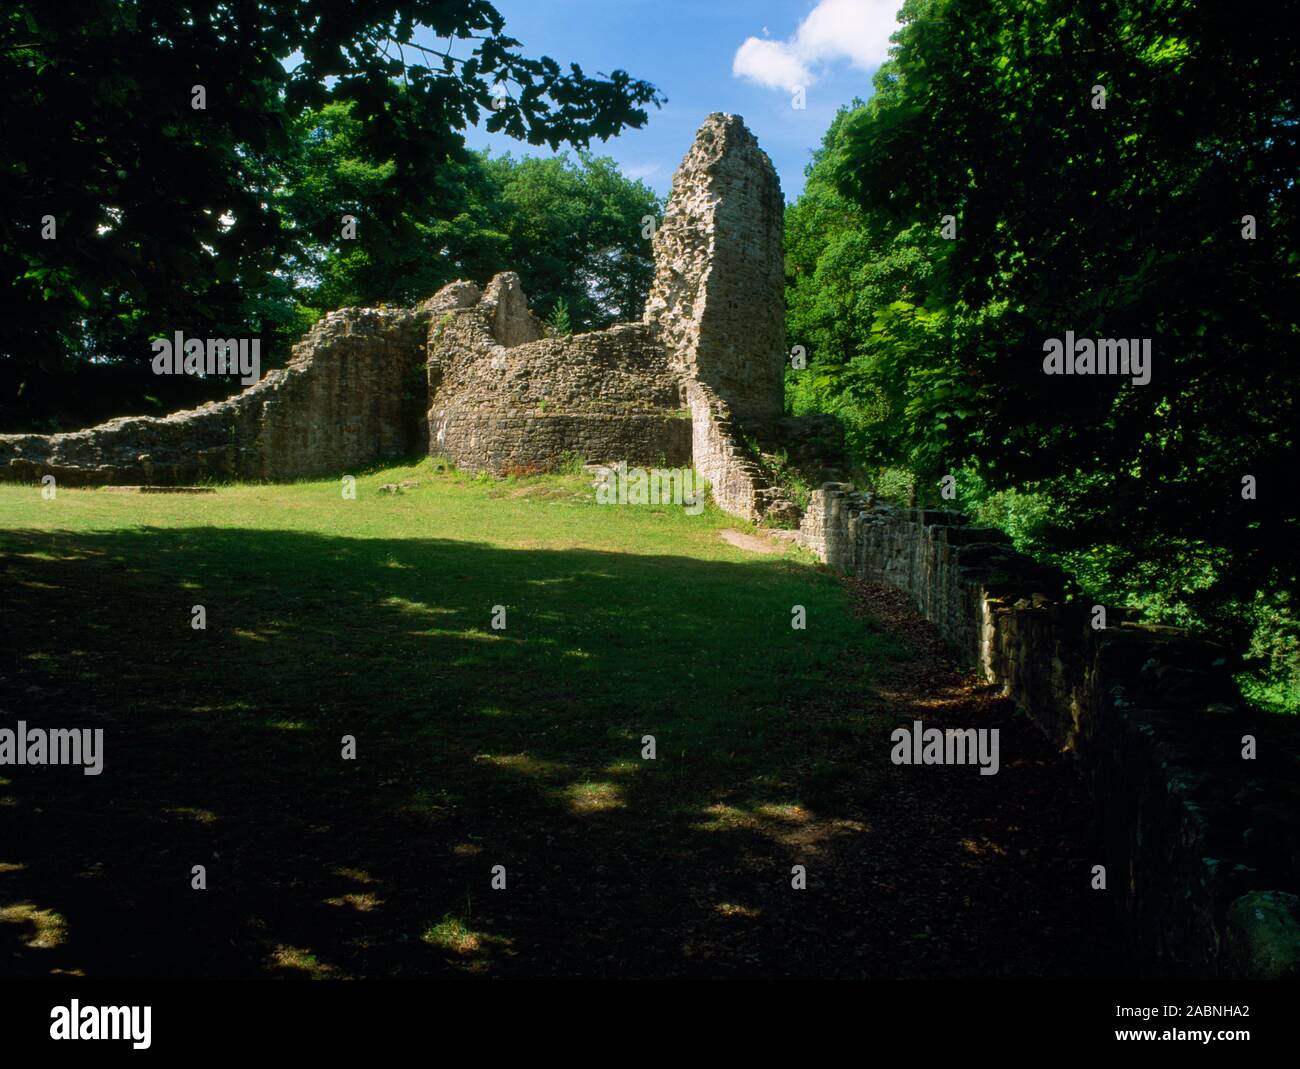 View SW of the round West Tower & curtain wall of the lower ward of Ewloe Castle, Flintshire, Wales, UK, built by Llywelyn ap Gruffudd around 1257. Stock Photo